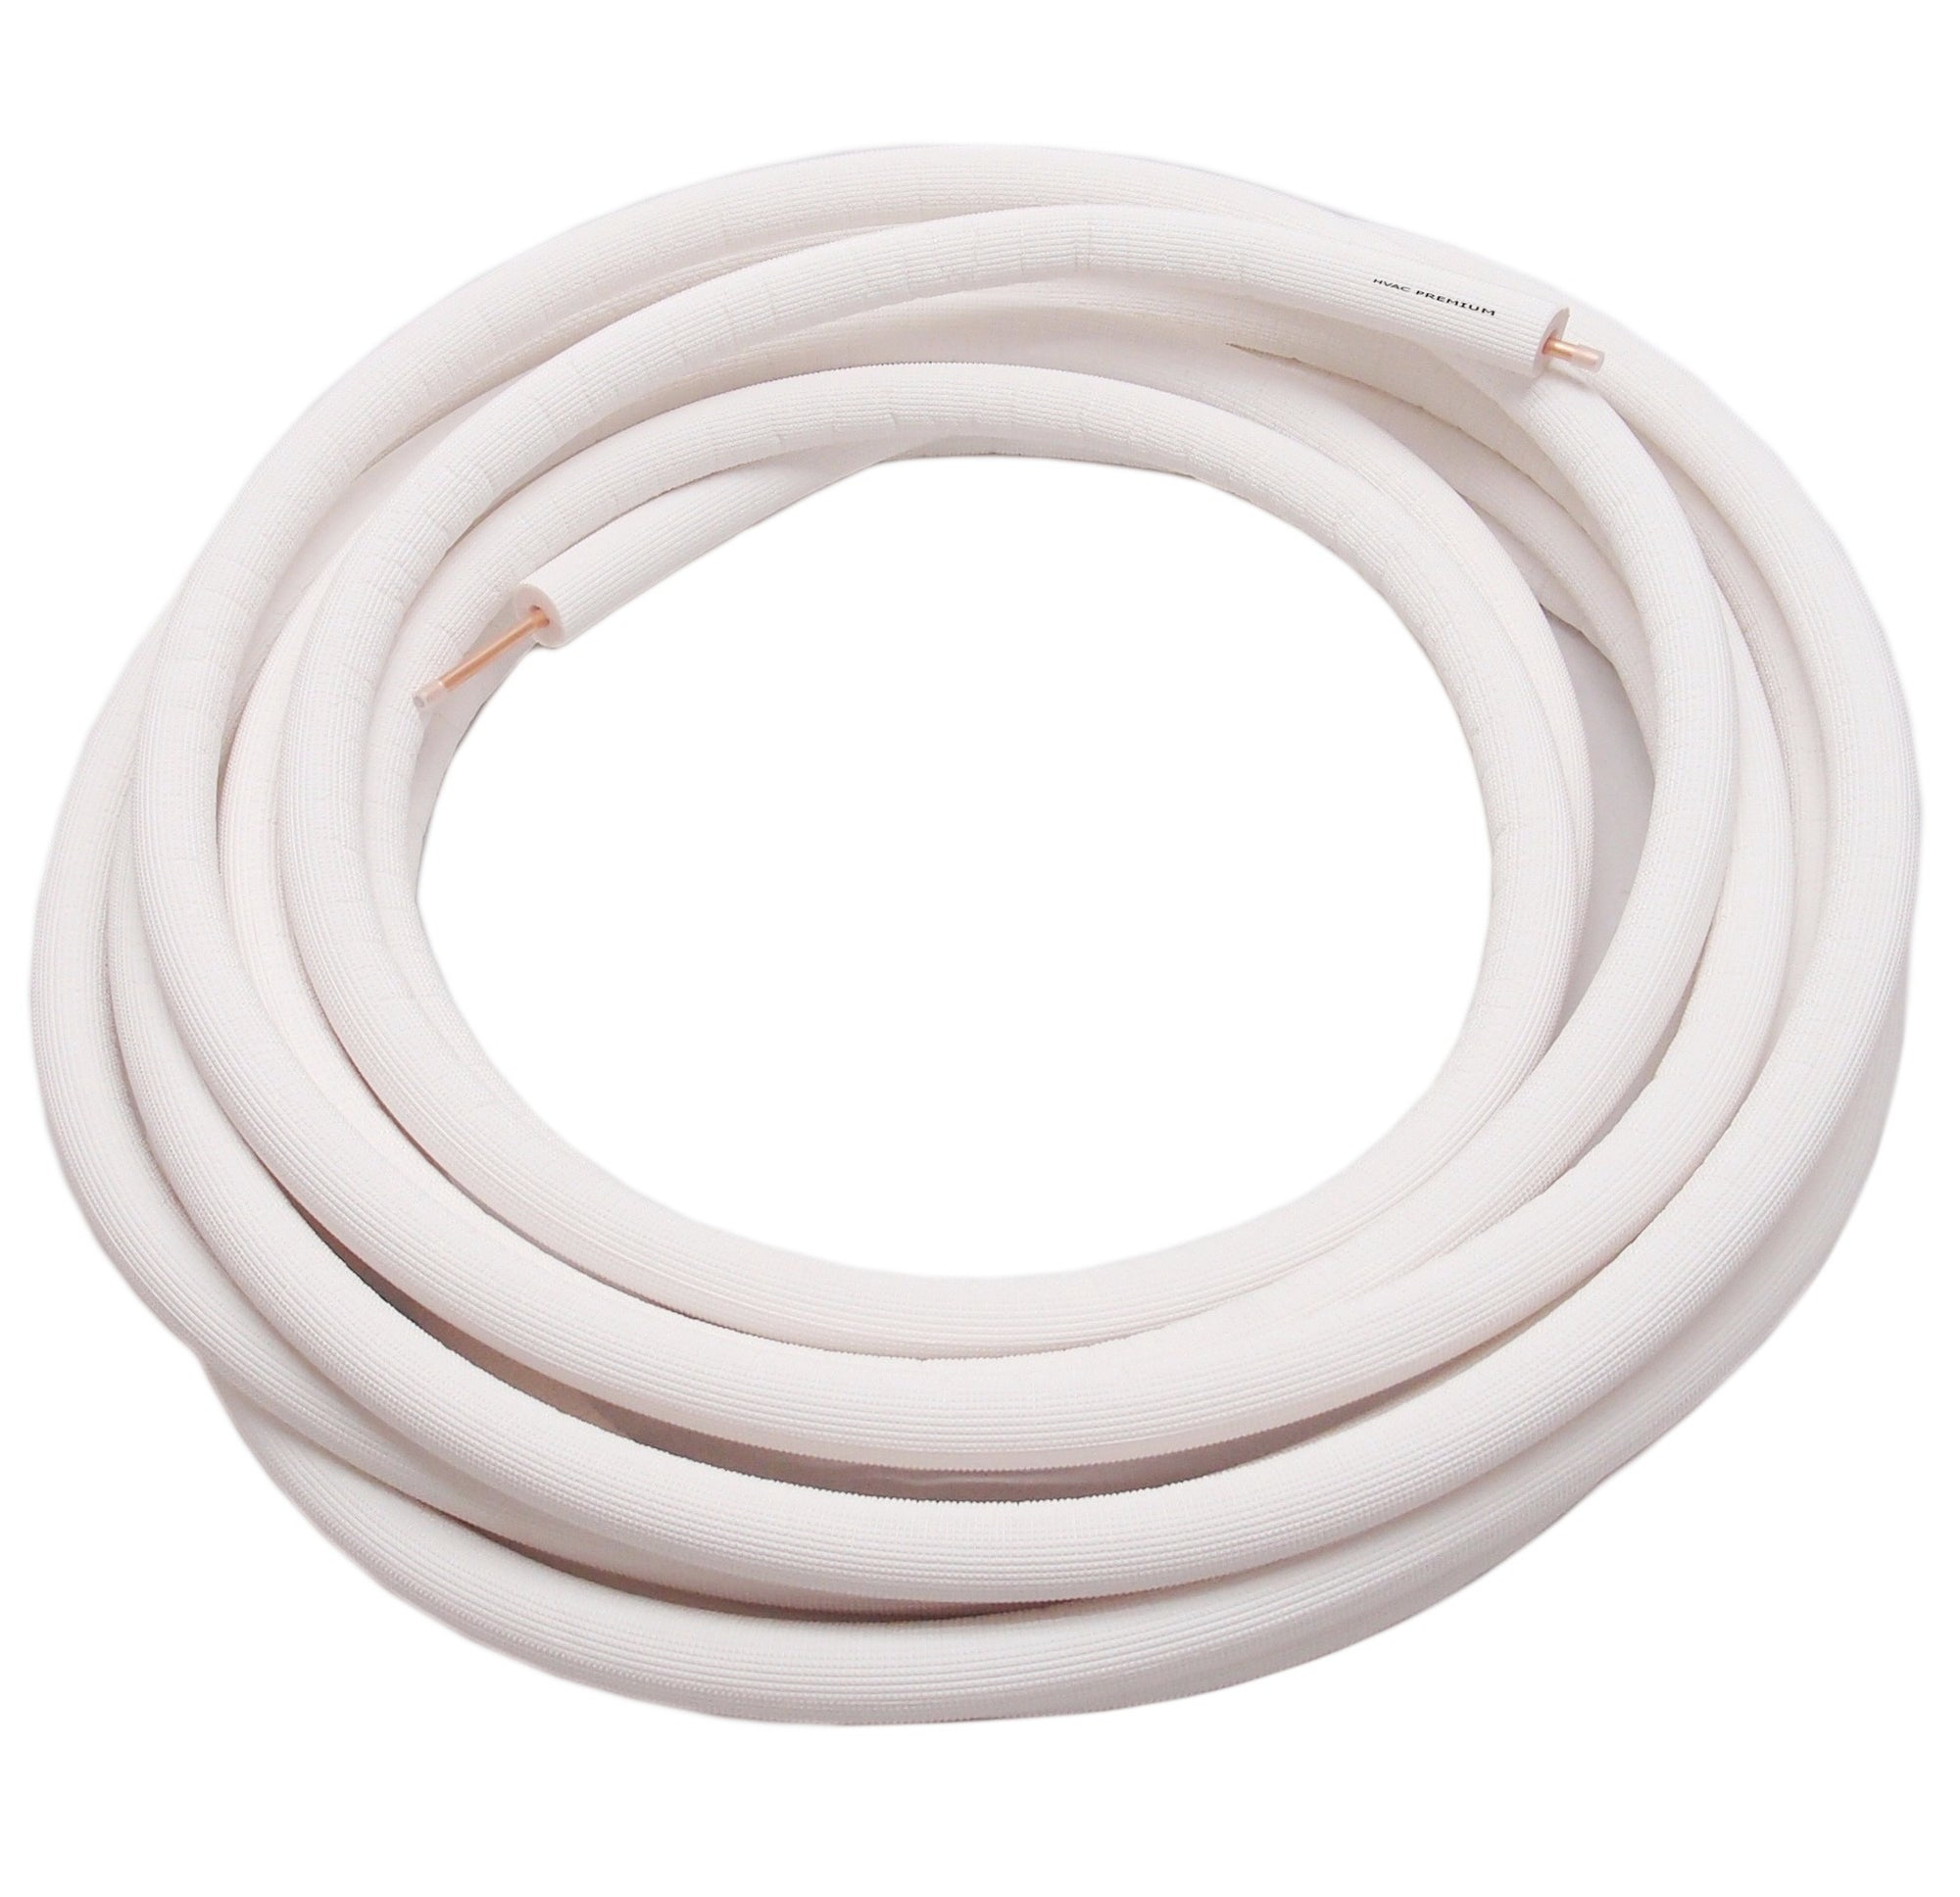 3/8" Insulated Copper Coil Line - Seamless Pipe Tube for HVAC, Refrigerant - 1/2" White Insulation - 164' Long